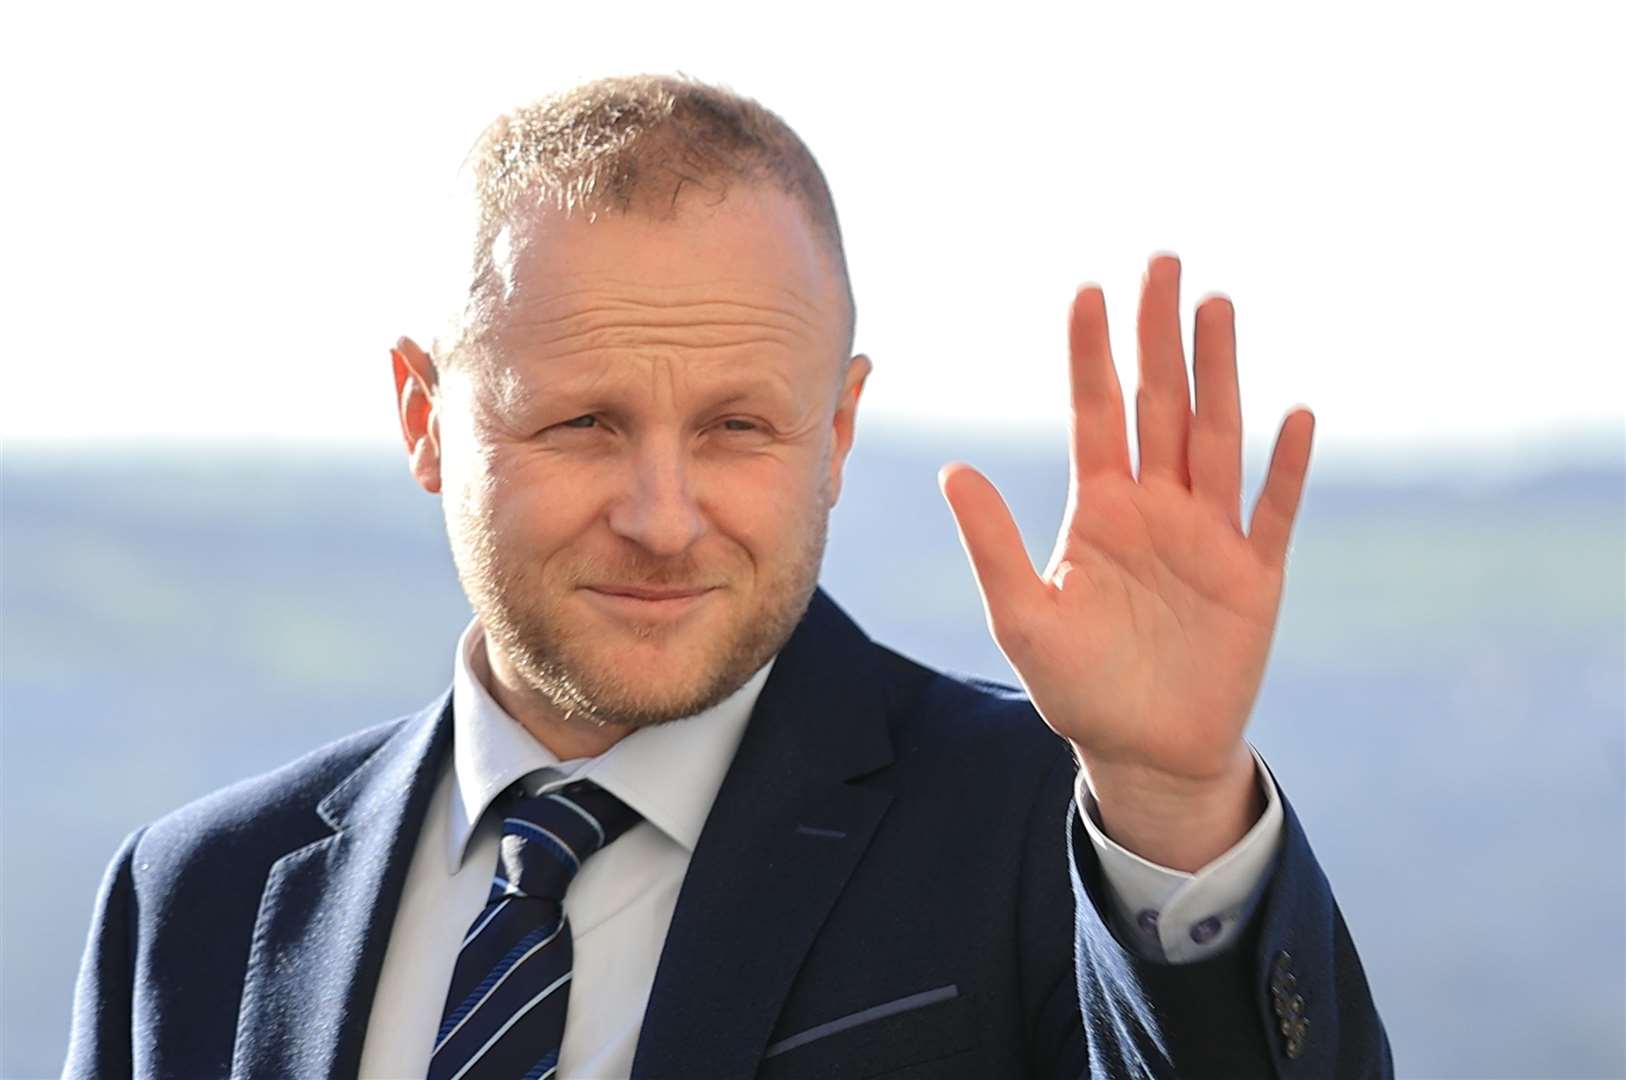 Jamie Bryson, a loyalist activist, has challenged the DUP leader to a public debate (Liam McBurney/PA)